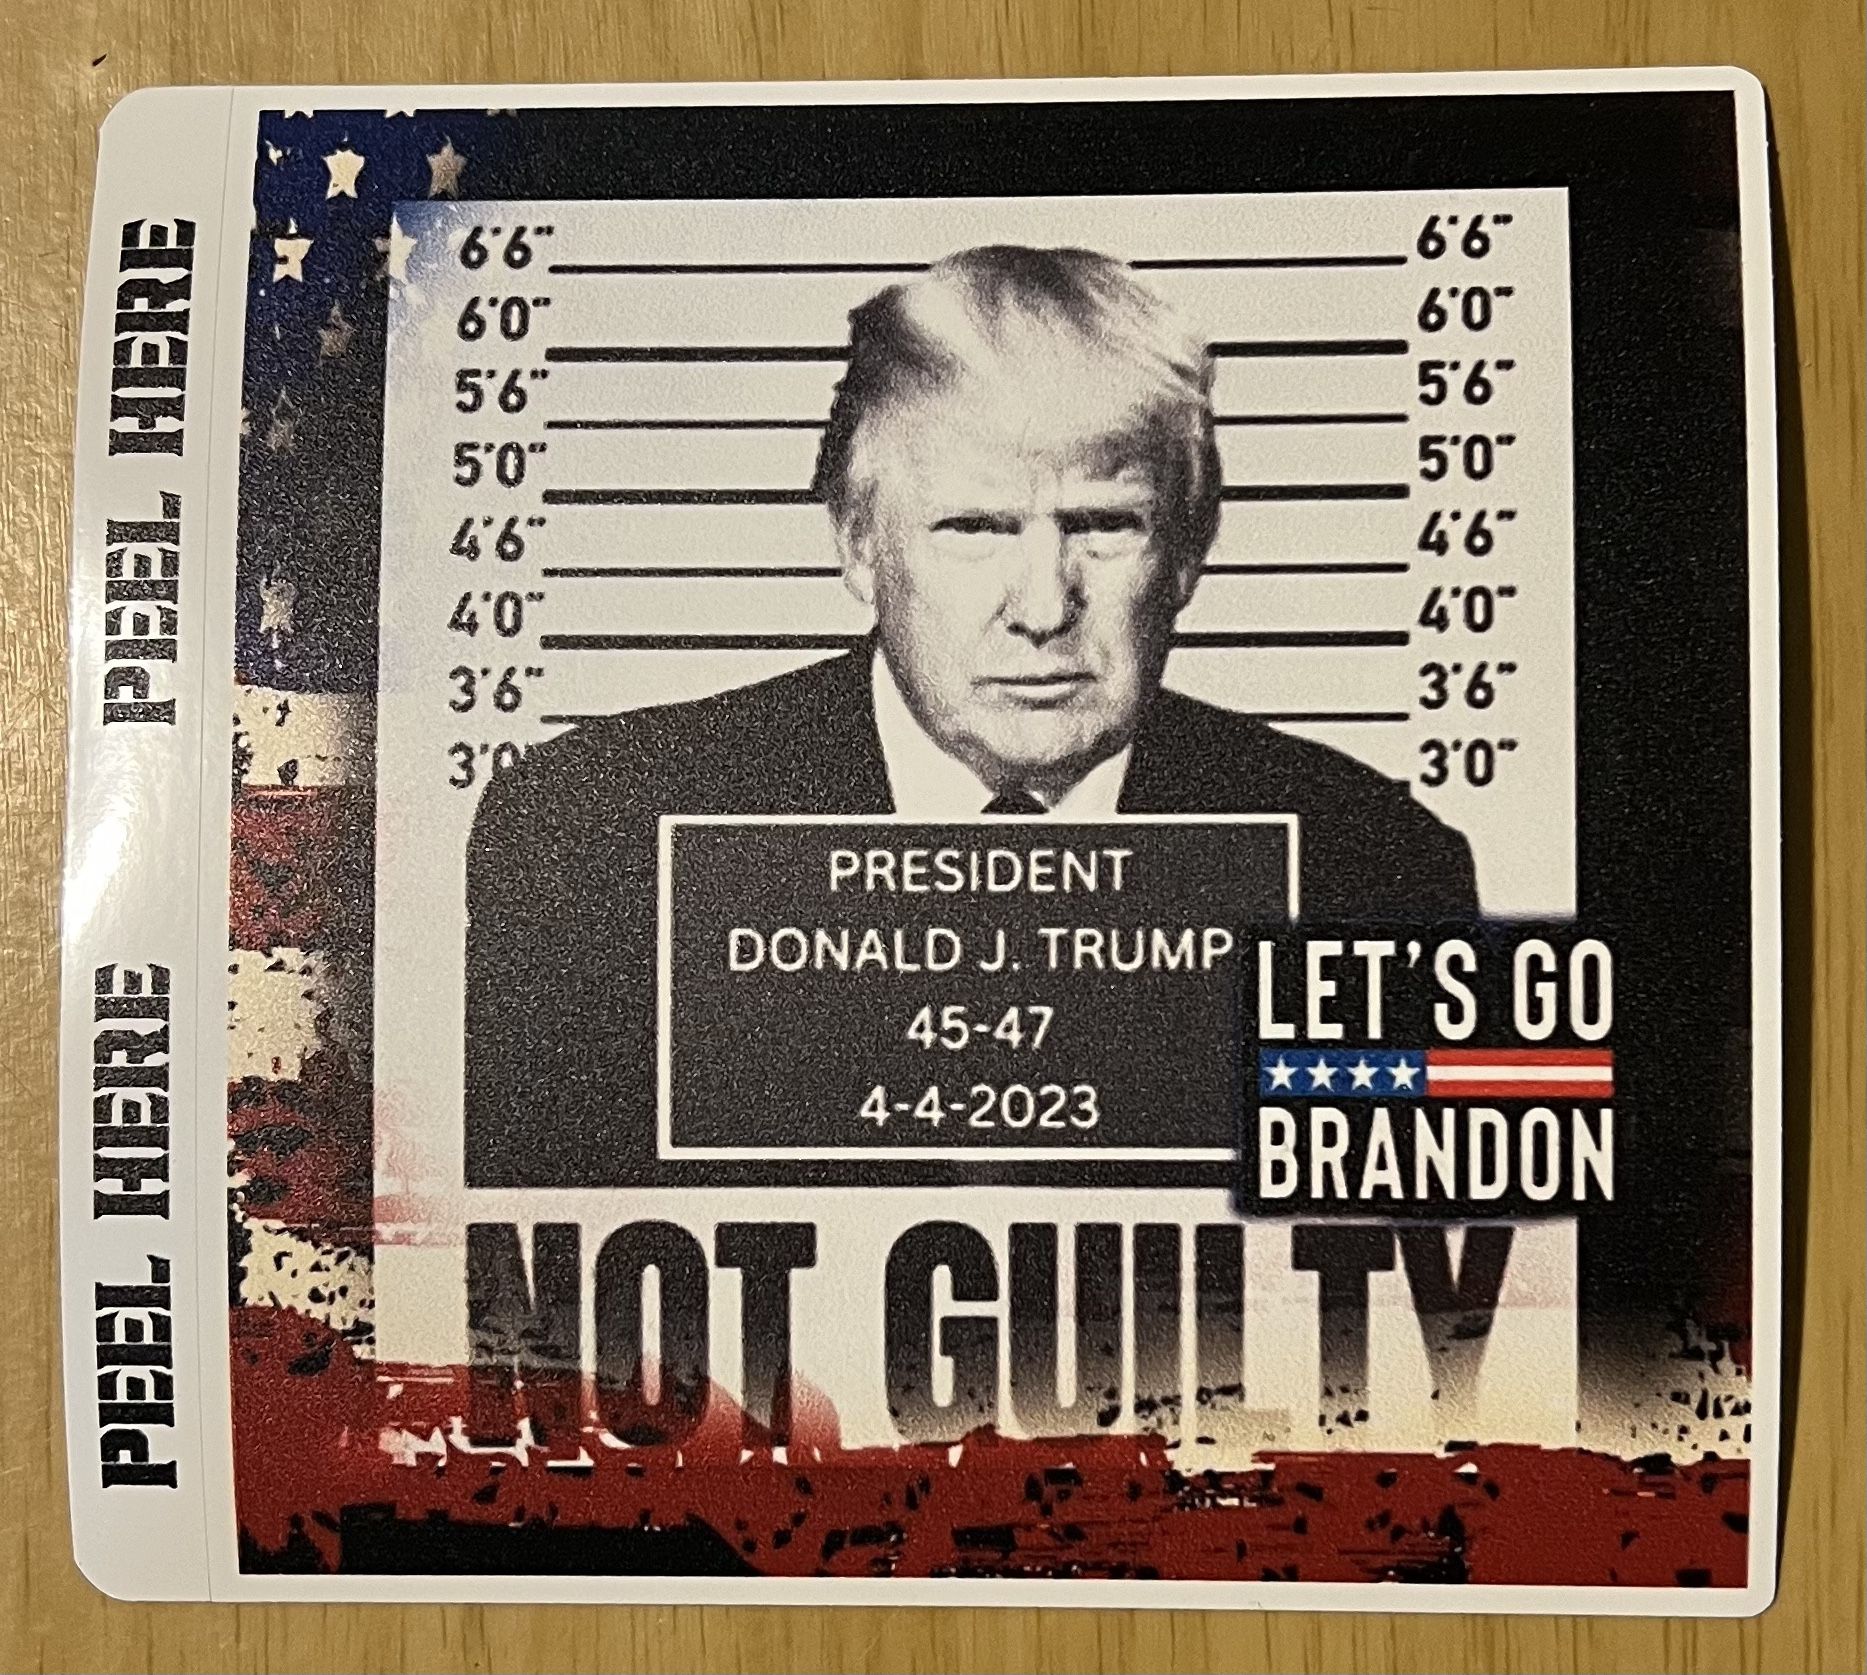 Donald Trump Not Guilty Stickers Great Quality For Indoor And Outdoor. 6$ Dollars Each.